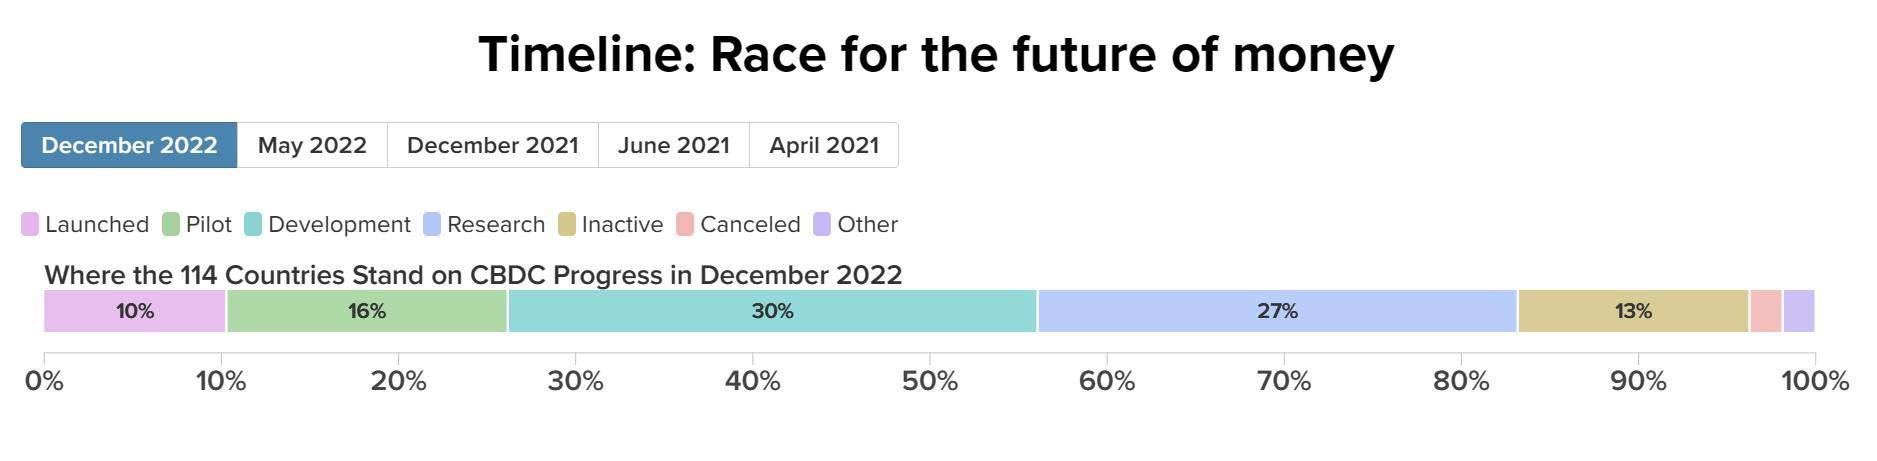 timeline race for the future of money